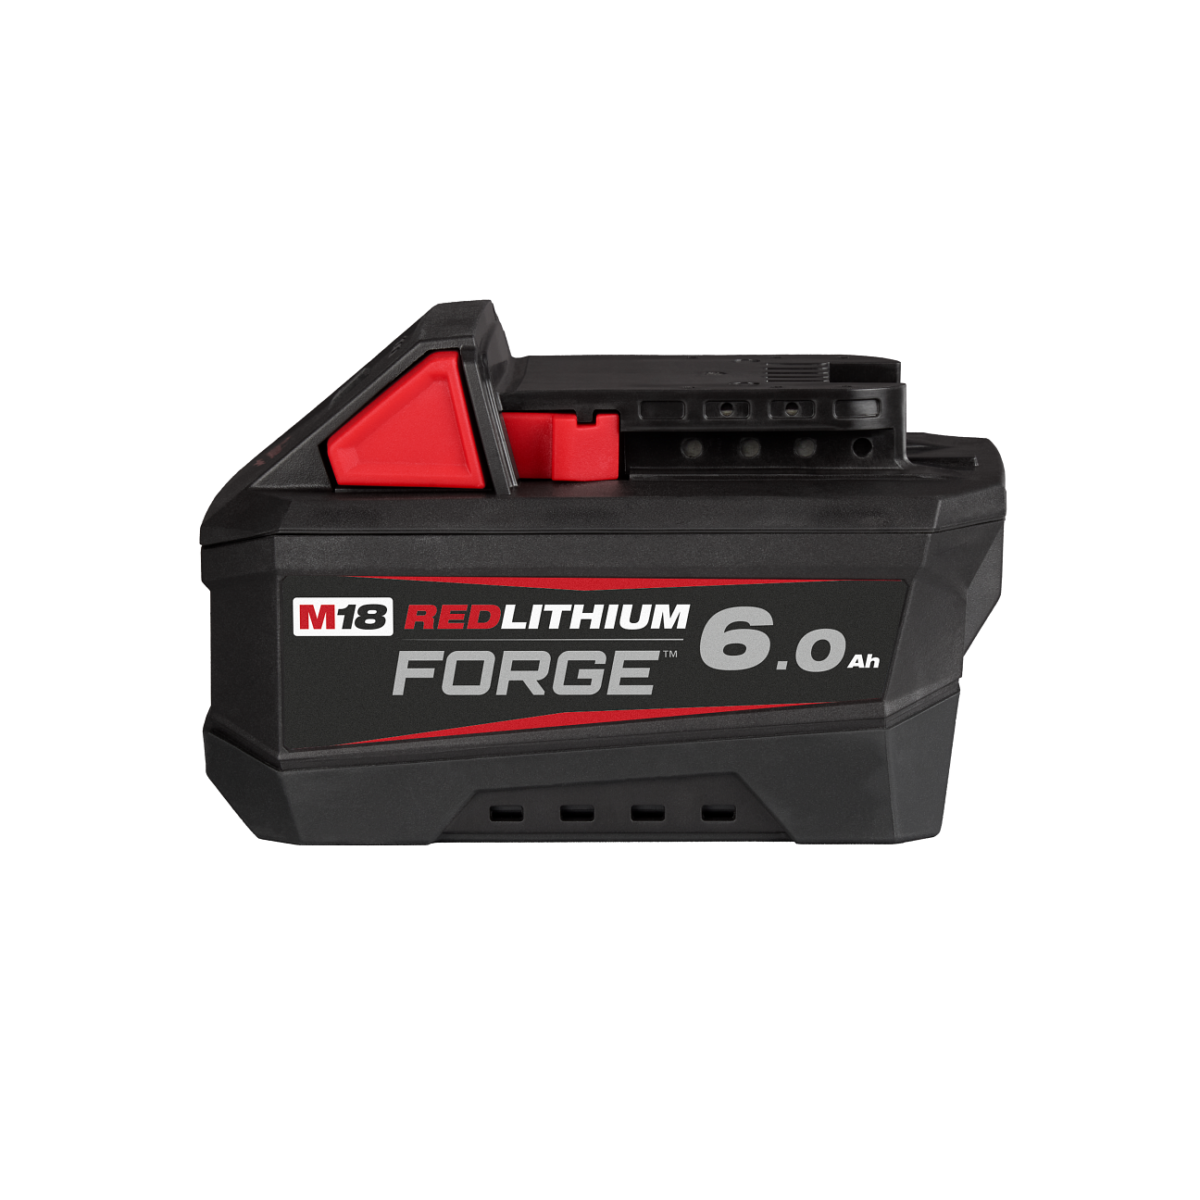 https://www.toomanytools.com/43627-thickbox_default/milwaukee-m18fb6-batterie-m18-forge-18v-60ah-red-lithium-ion-4932492533.jpg